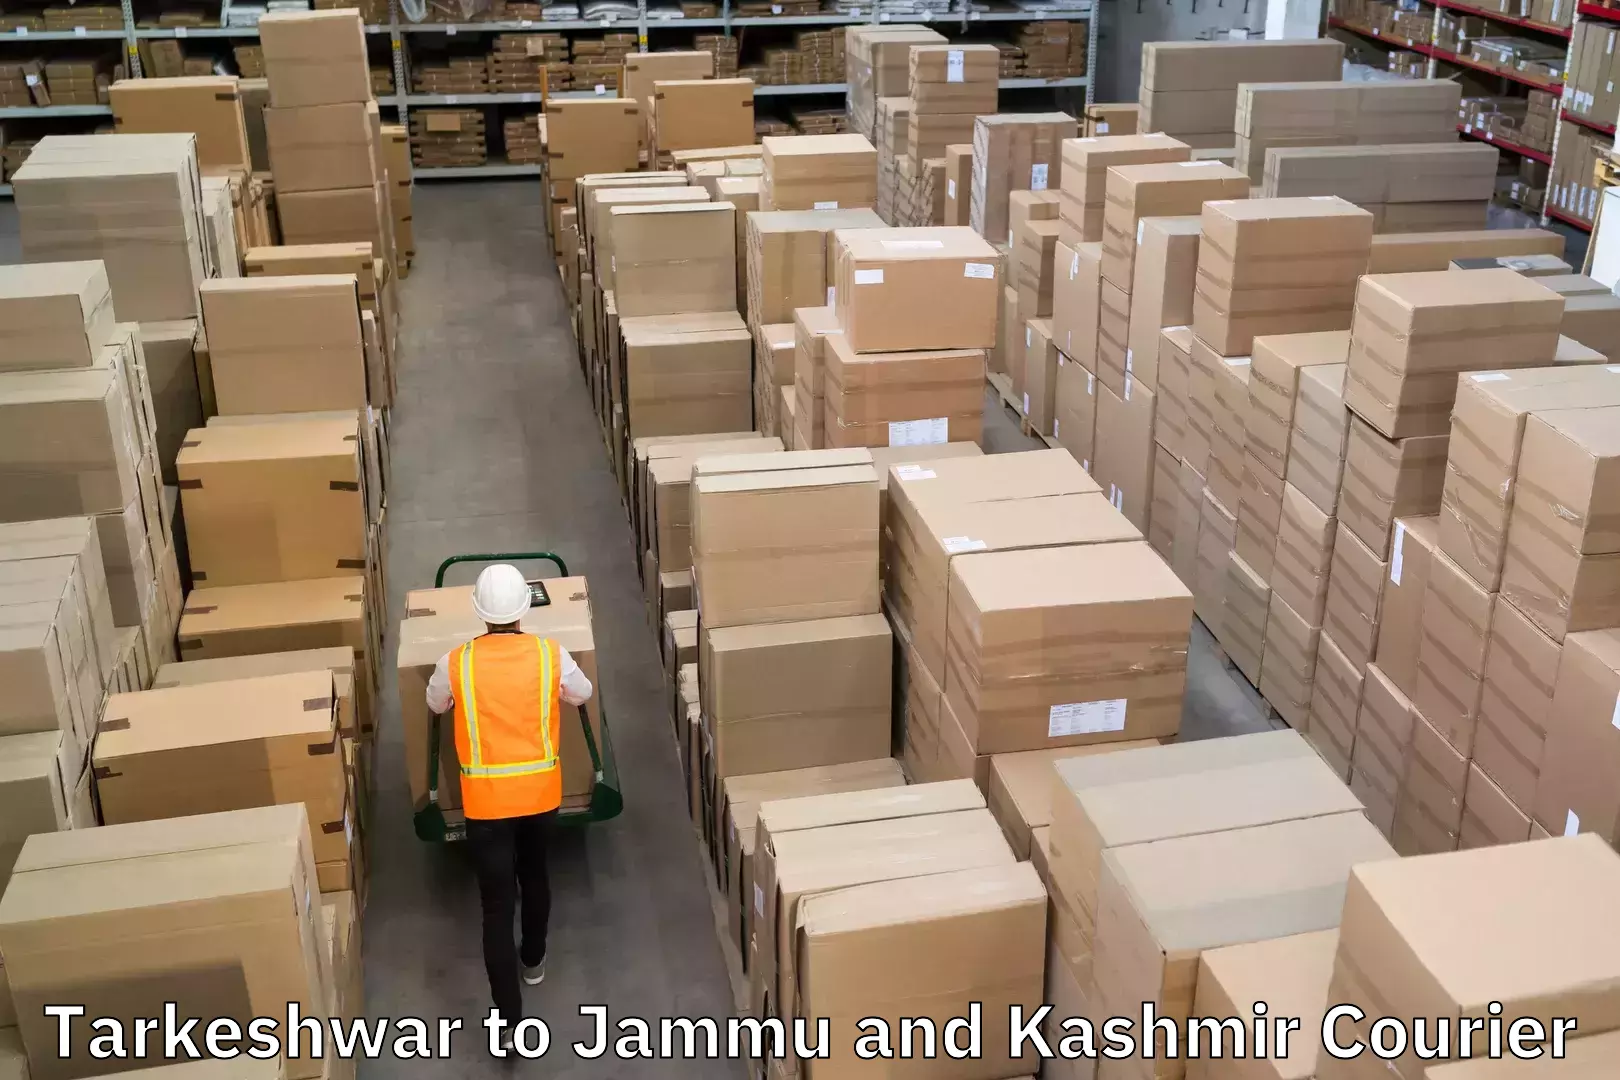 Same-day delivery solutions Tarkeshwar to Jammu and Kashmir